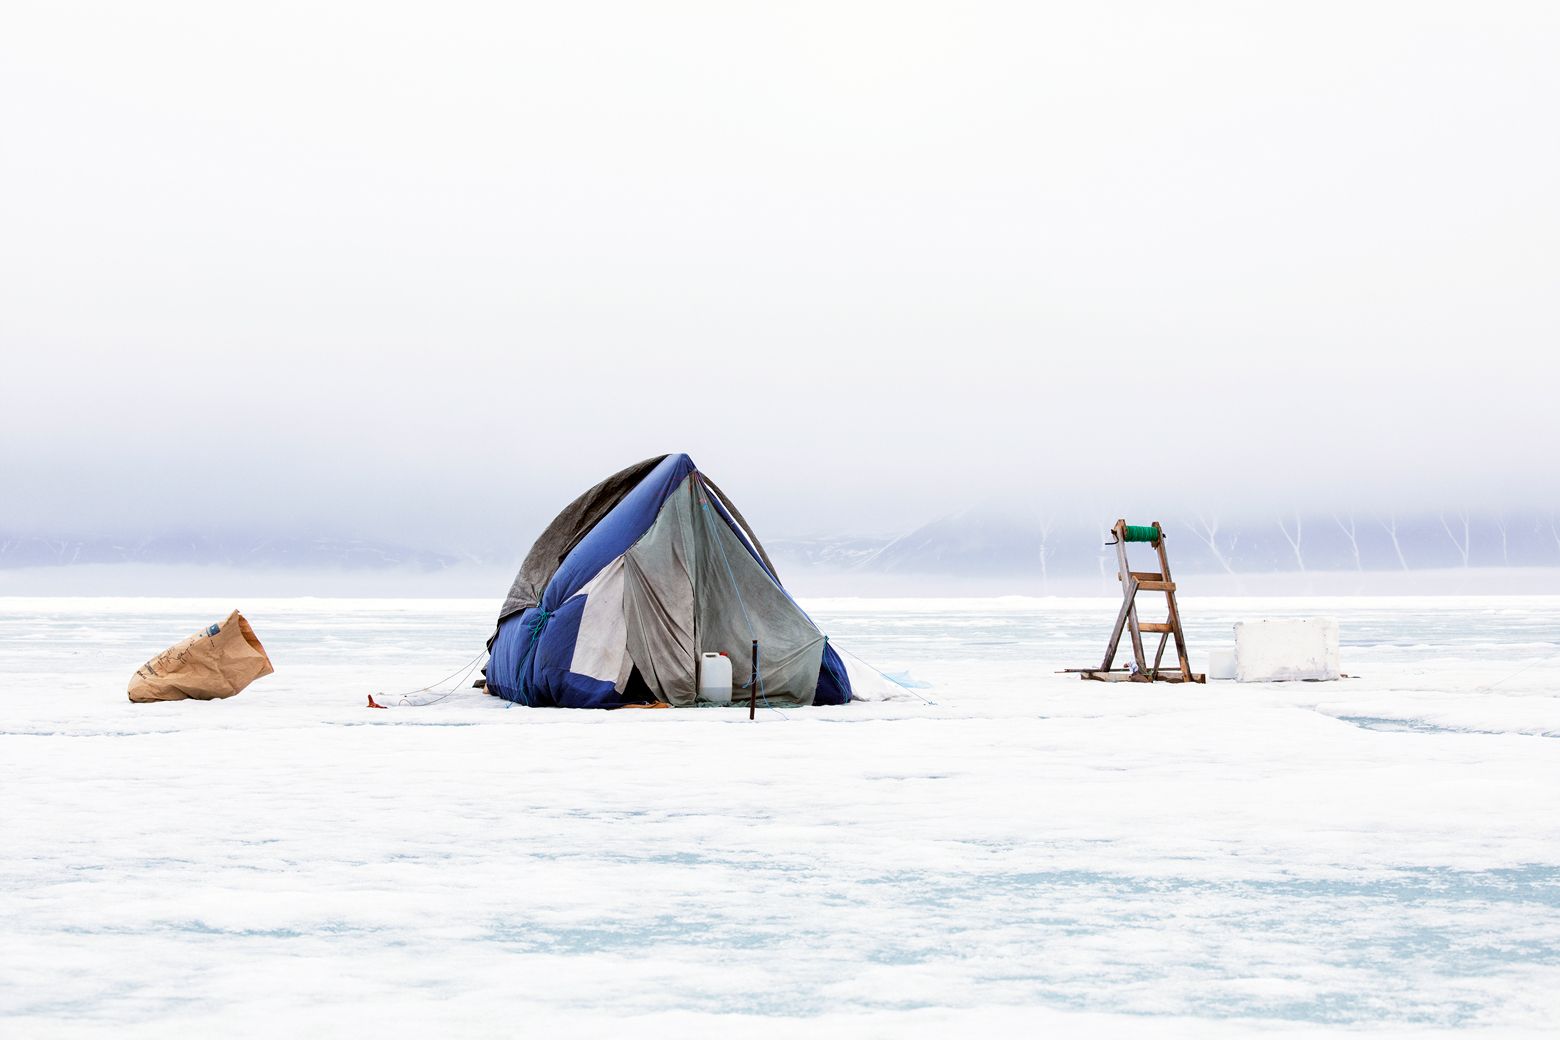 People have lost their lives on the sea ice. But despite its increasing dangers, some hunters still camp there during the hunting season. Image by Anna Filipova. Greenland, 2018.